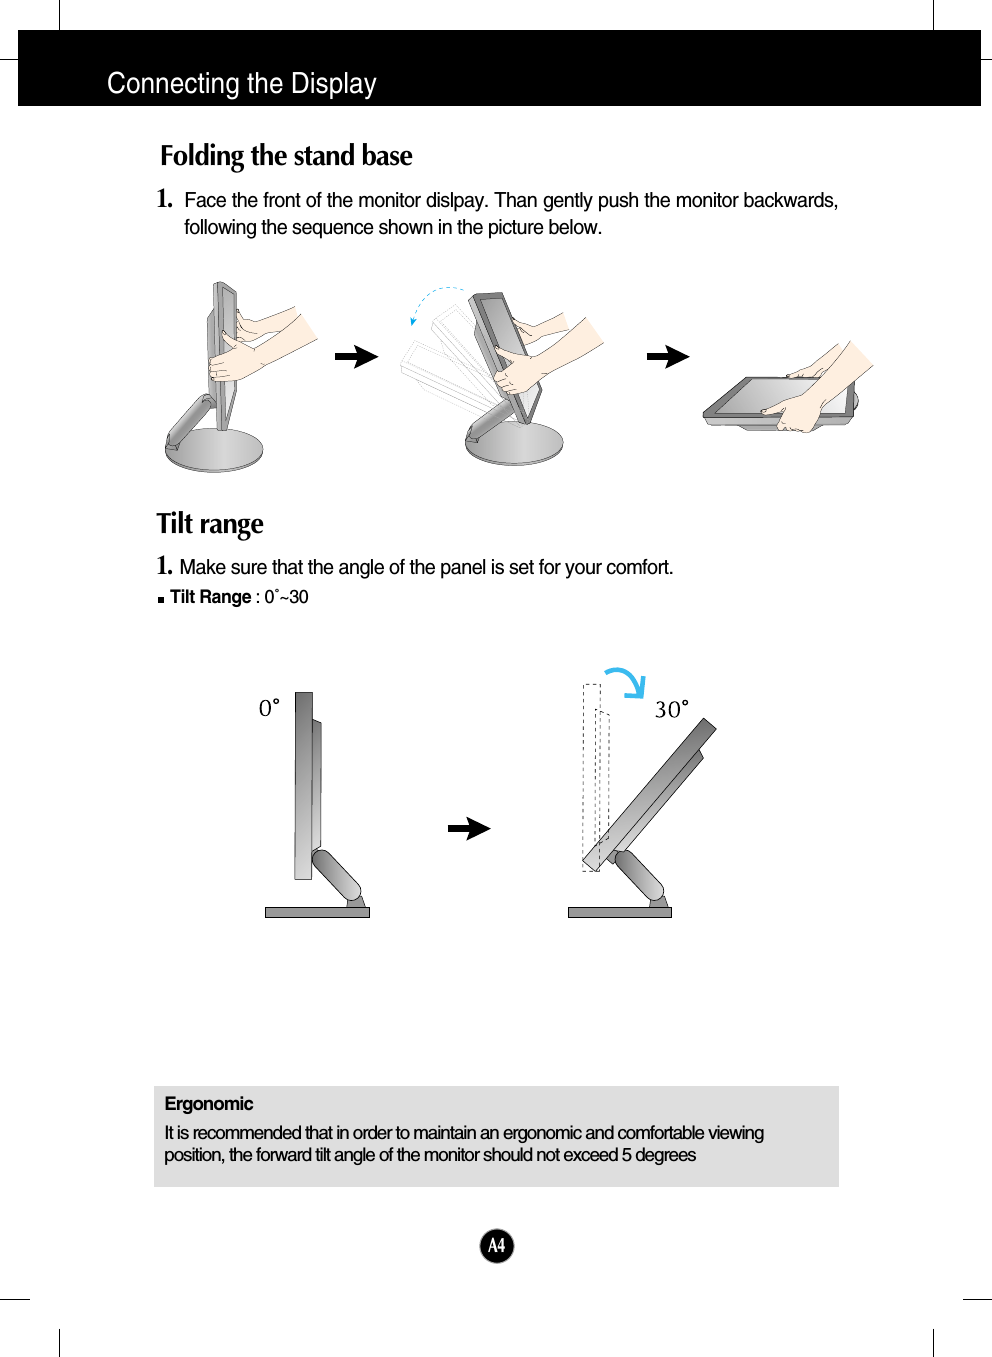 A4Connecting the Display1.Face the front of the monitor dislpay. Than gently push the monitor backwards,following the sequence shown in the picture below. Folding the stand baseTilt range 1.Make sure that the angle of the panel is set for your comfort. Tilt Range : 0˚~30     ErgonomicIt is recommended that in order to maintain an ergonomic and comfortable viewingposition, the forward tilt angle of the monitor should not exceed 5 degrees